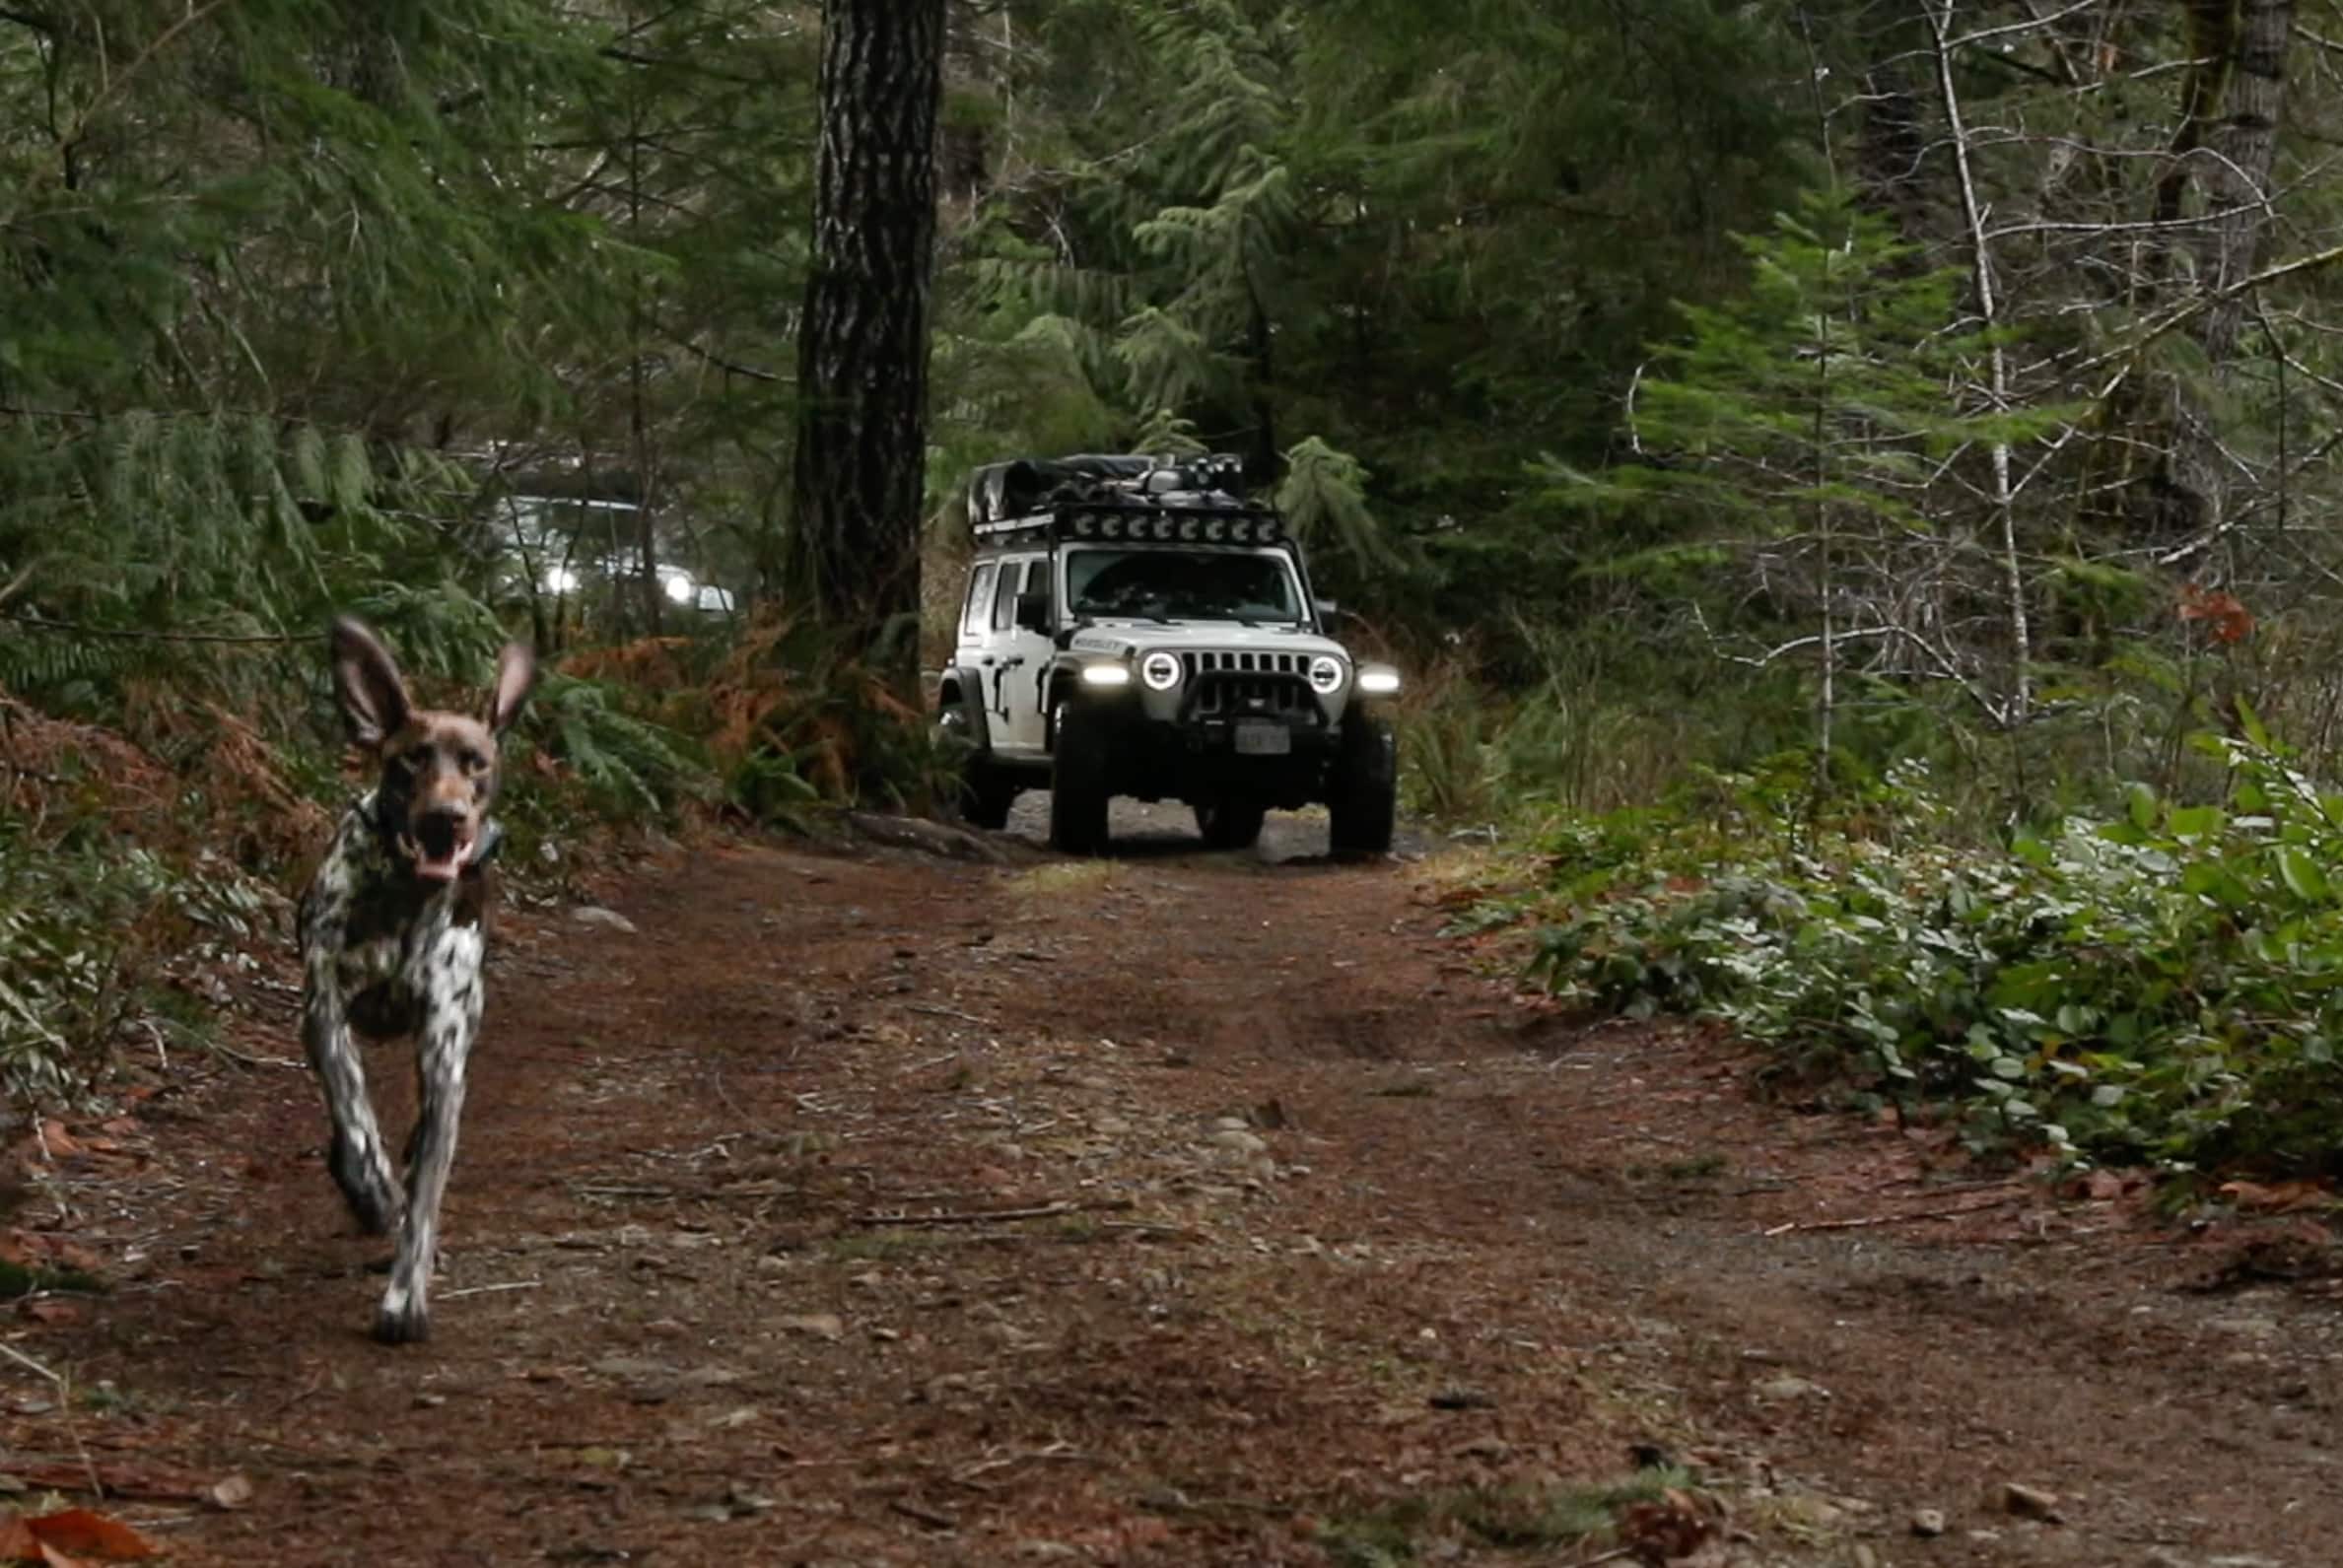 Lando the dog running being followed by a jeep